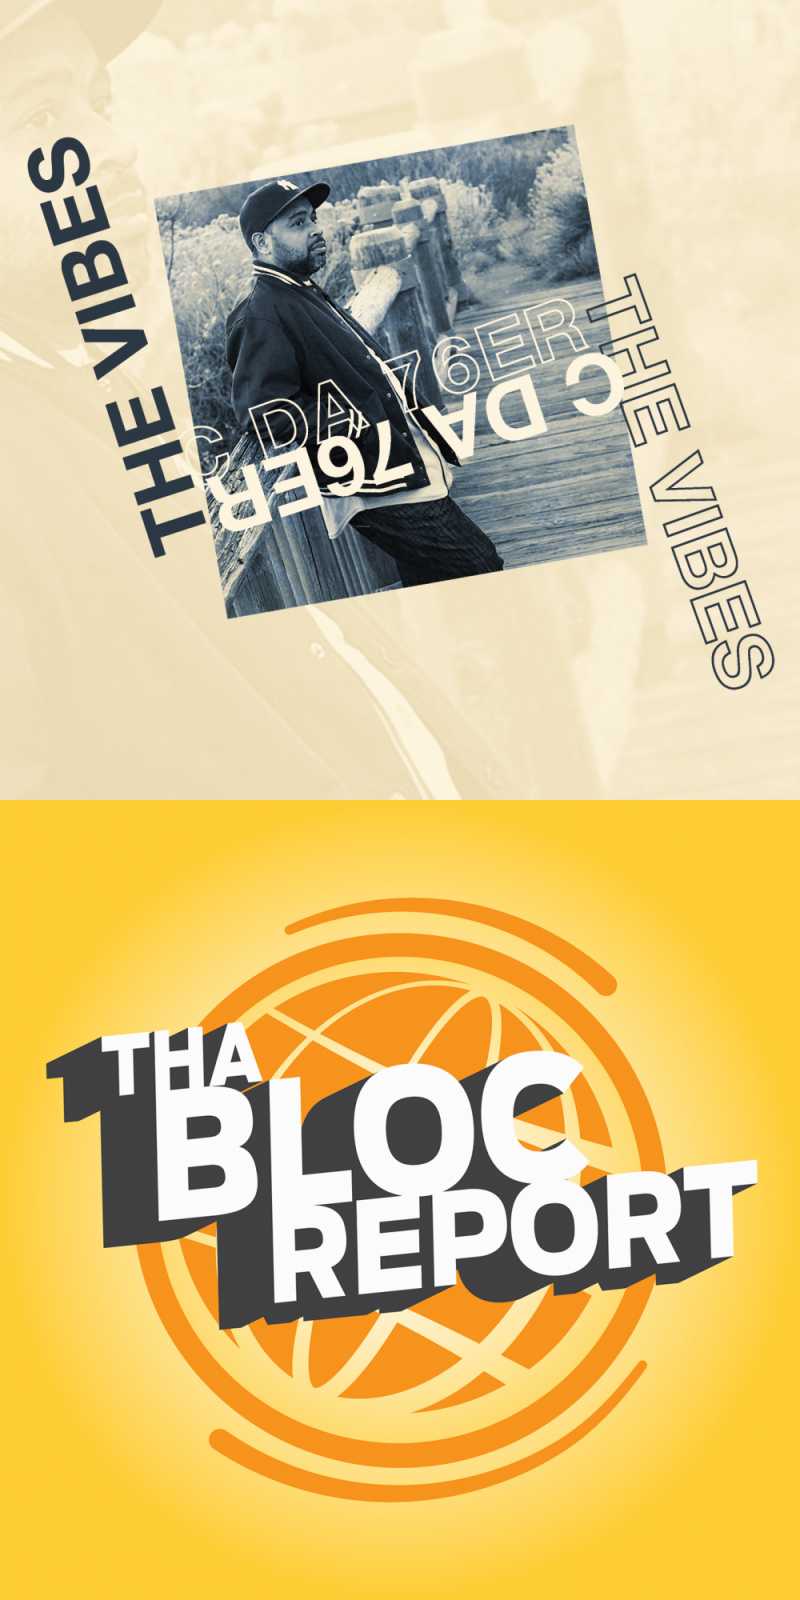 Covers of “The Vibes” by C da 76er and Tha Bloc Report hosted by Pot-C